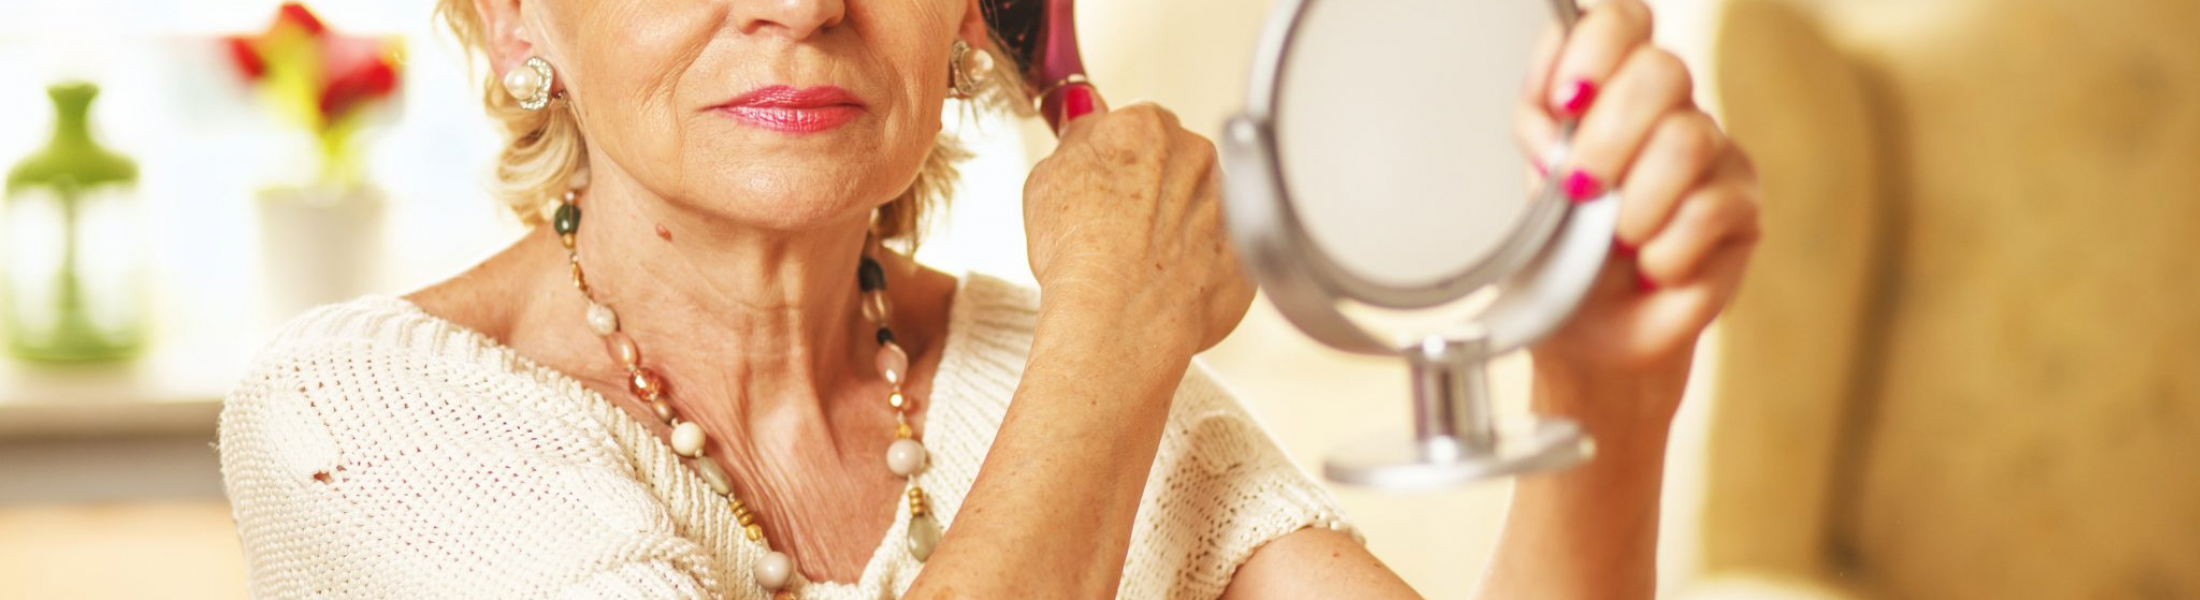 Care Tips Personal Hygiene Care for the Elderly